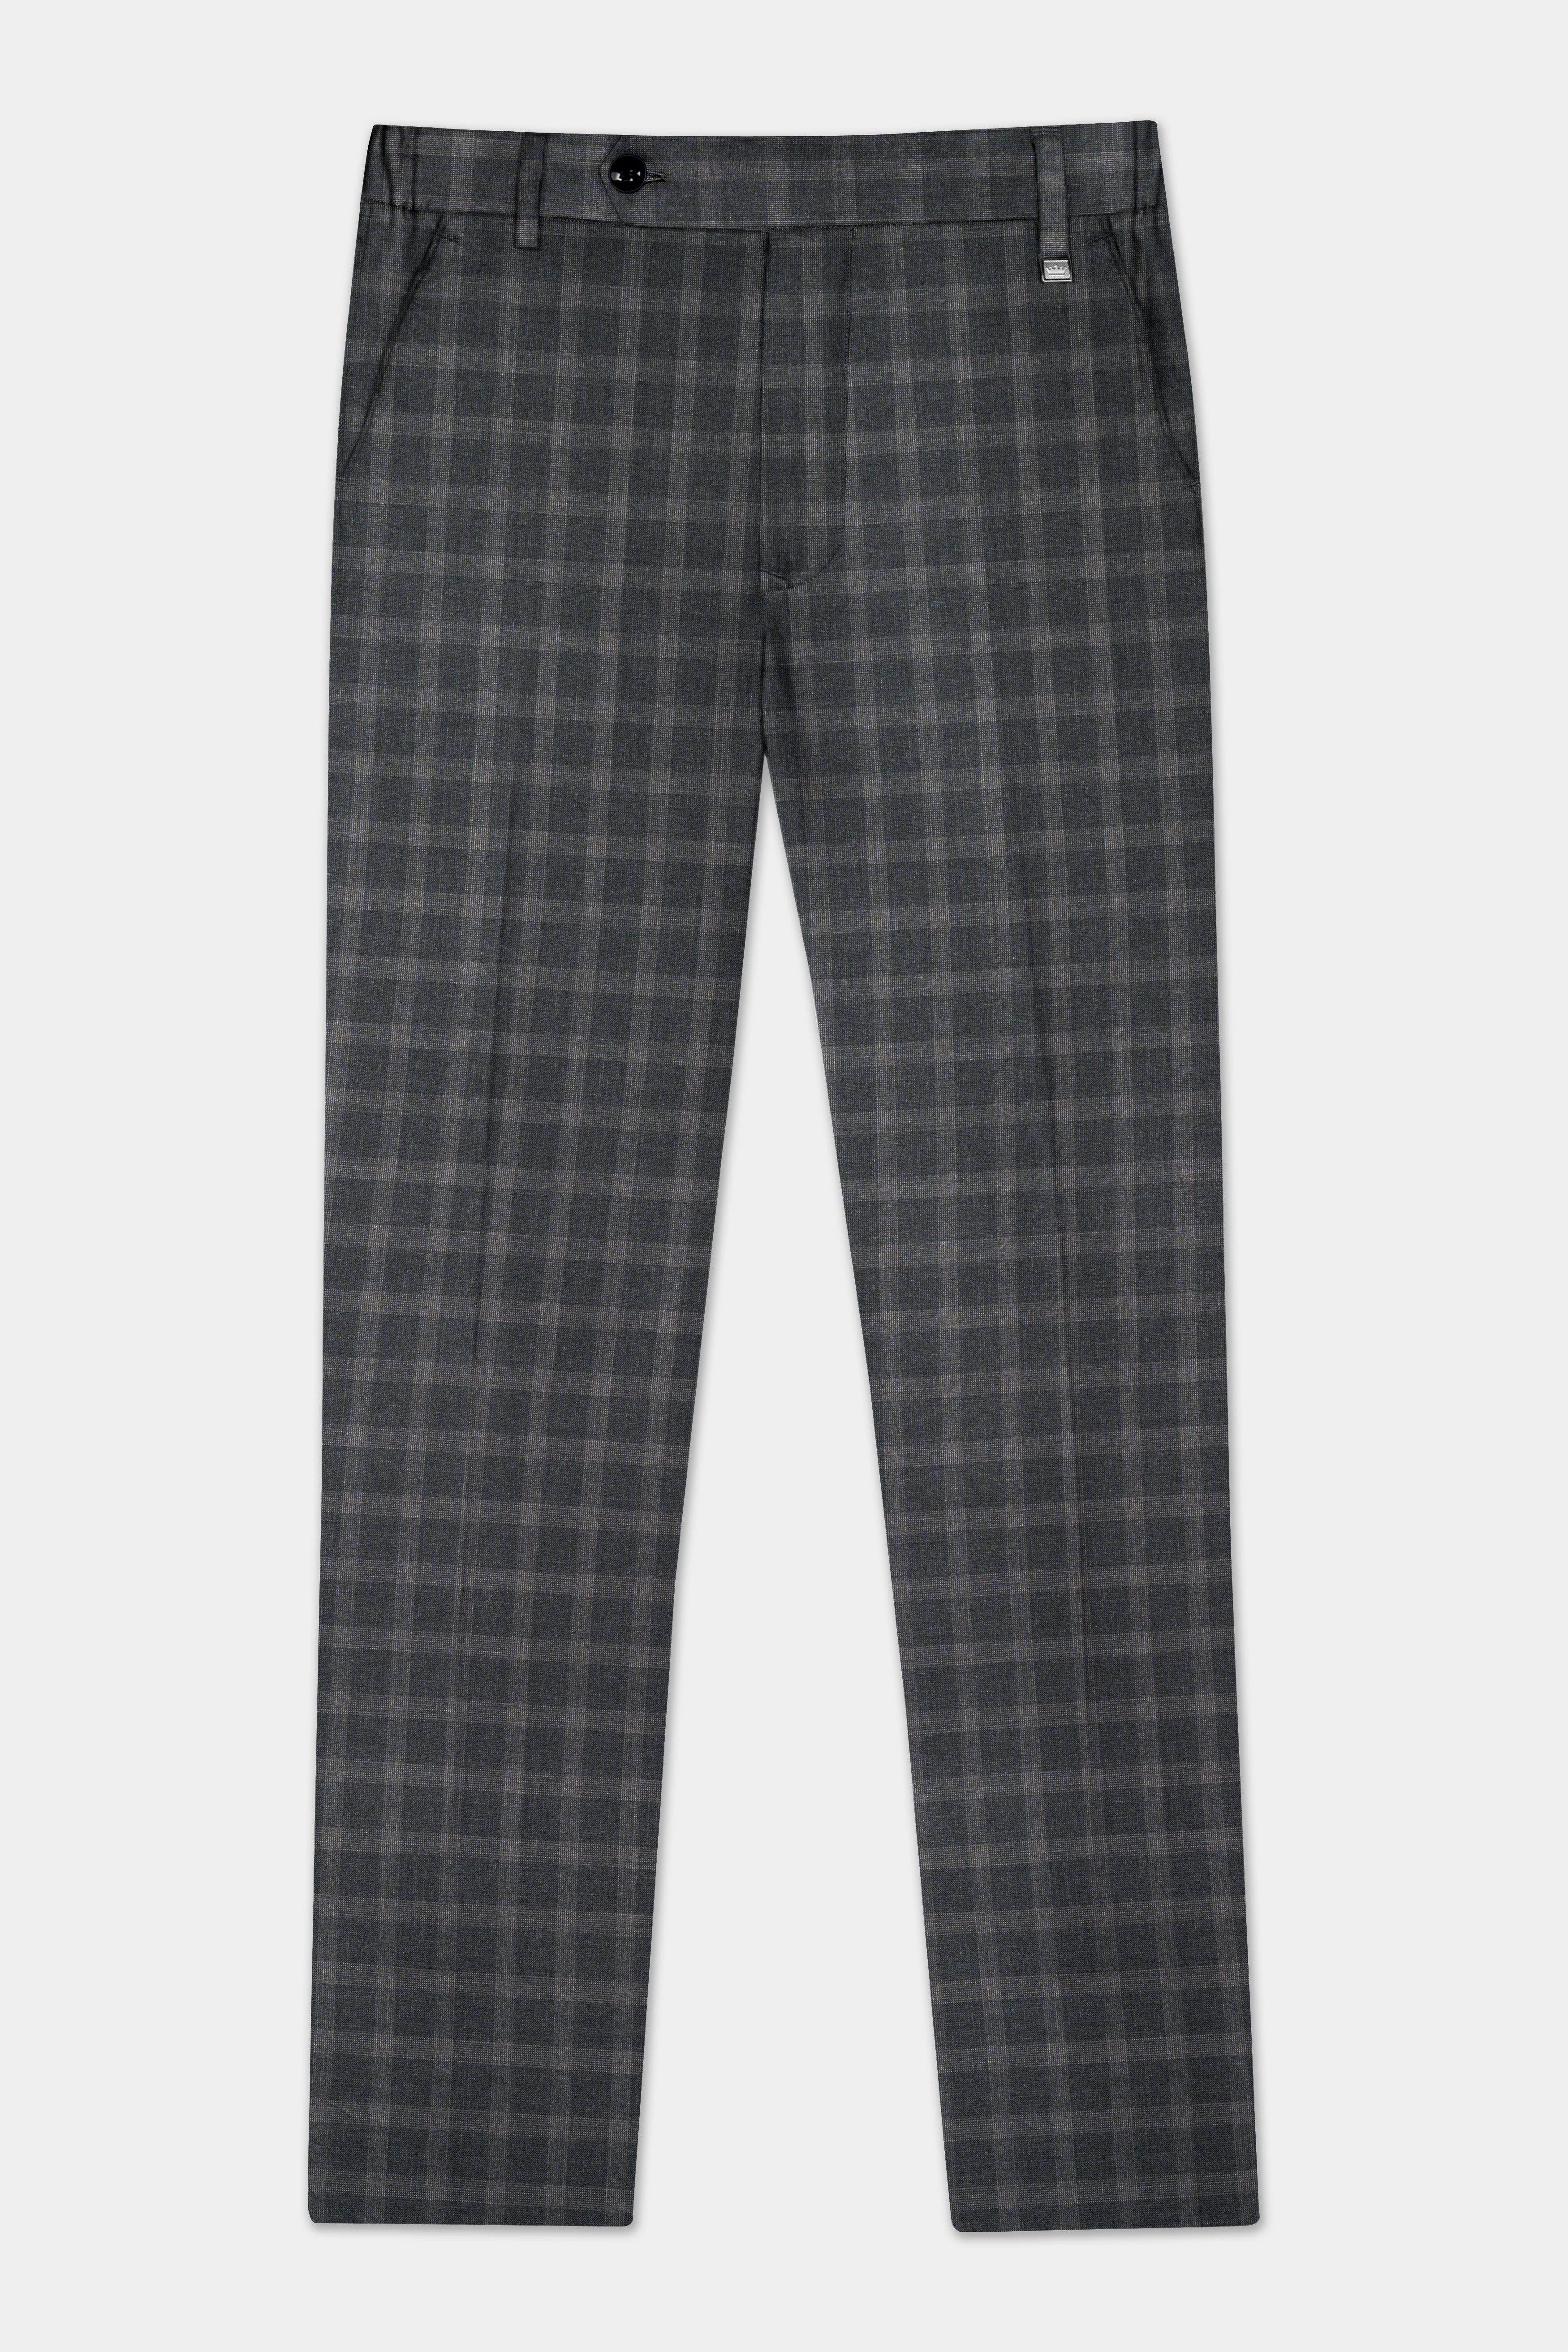 Gravel Gray Checkered Wool Blend Double Breasted Suit